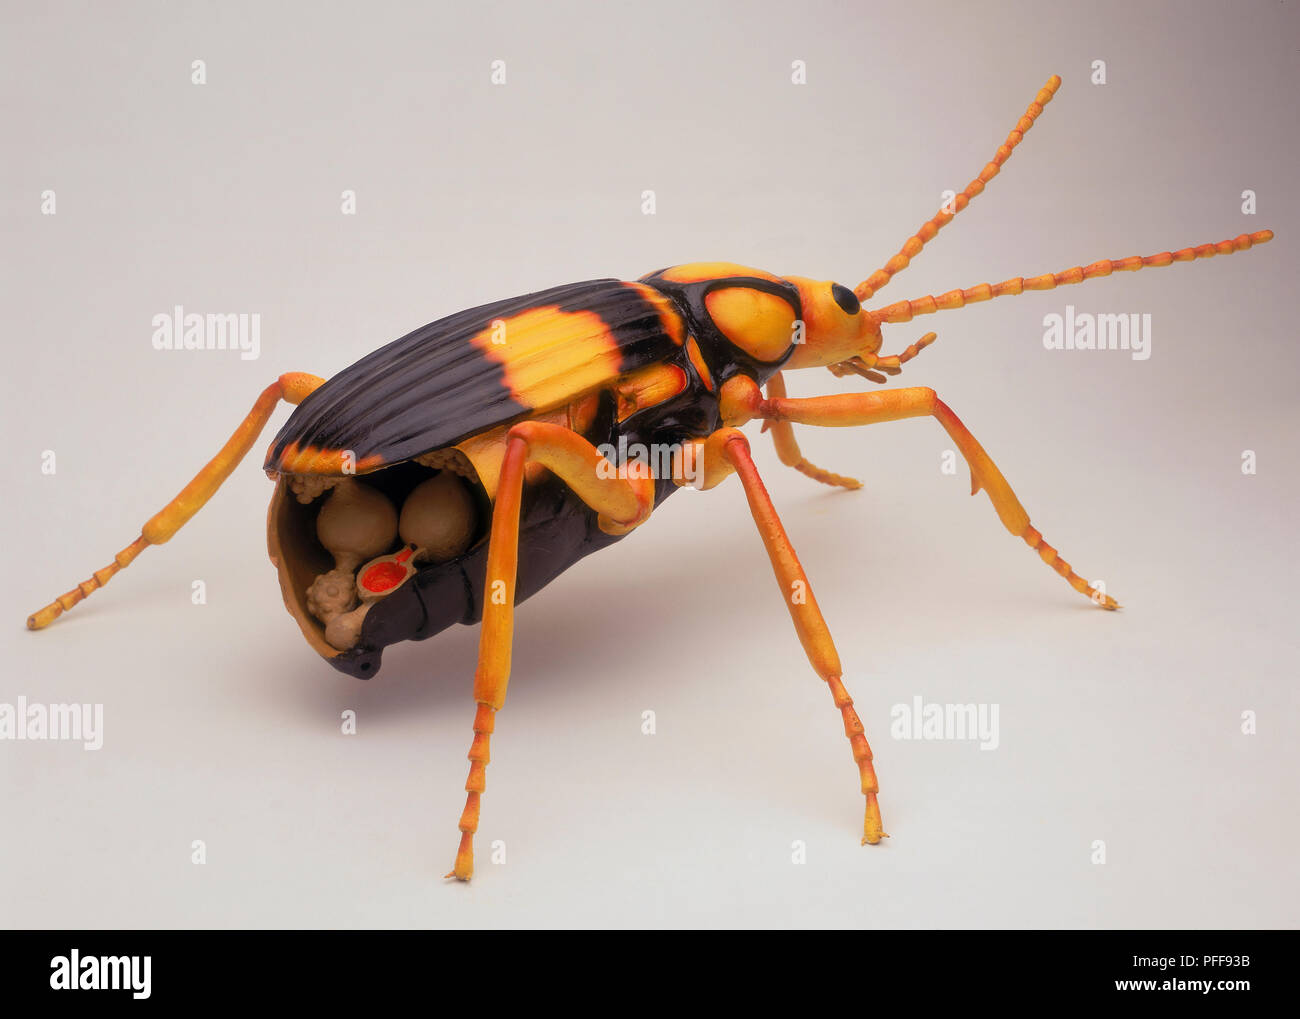 Side view of model of black and yellow Bombardier Beetle with yellow legs, cross section showing venom glands and reservoir, explosion chamber filled with red liquid with one-way valve, side view. Stock Photo